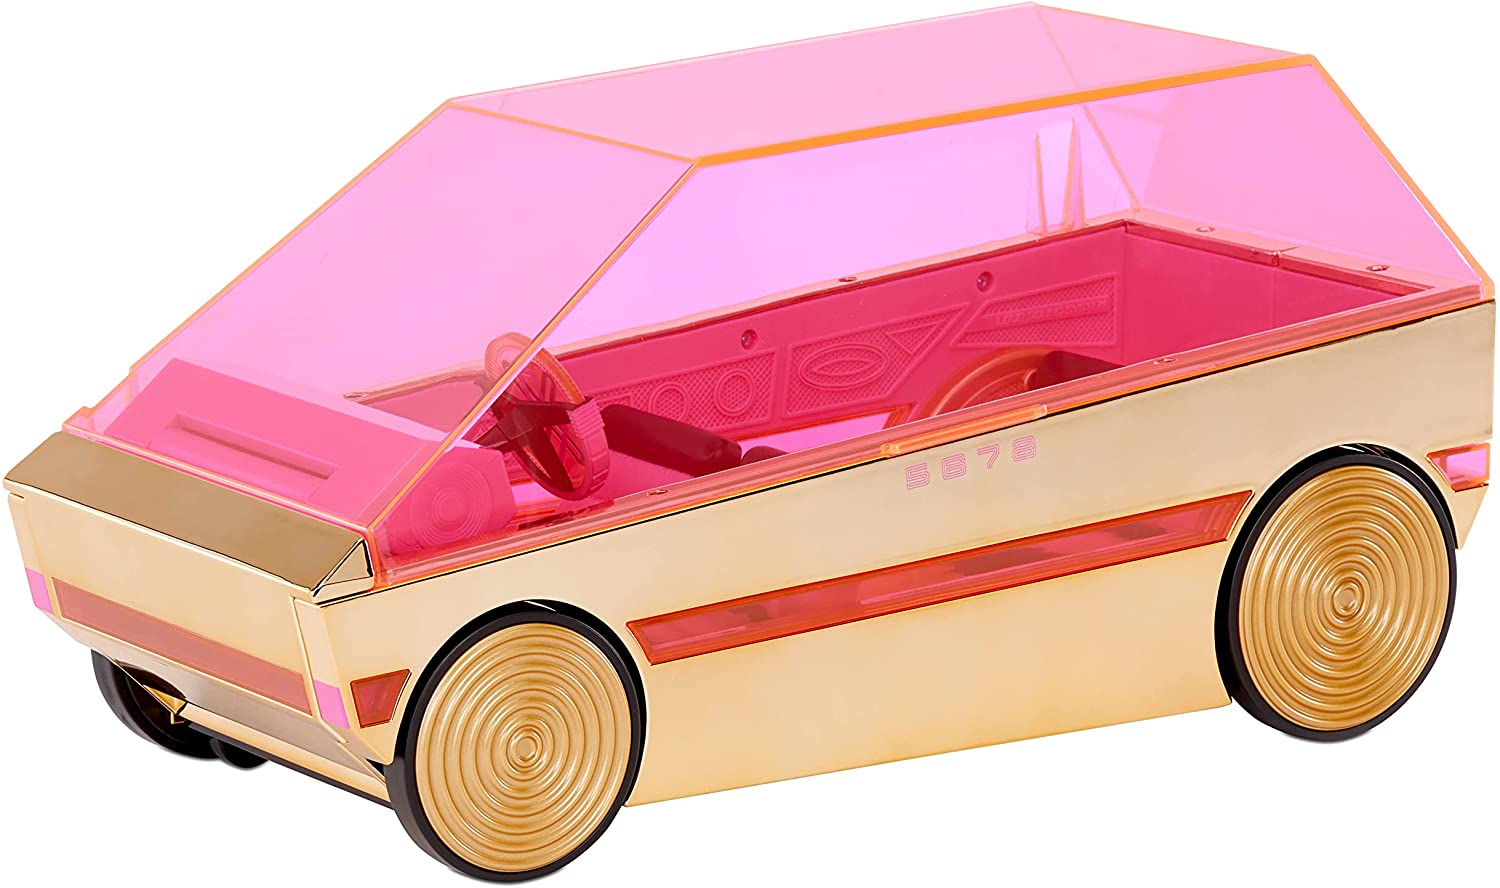 LOL Surprise 3-in-1 Party Cruiser Car $25 + Free Shipping